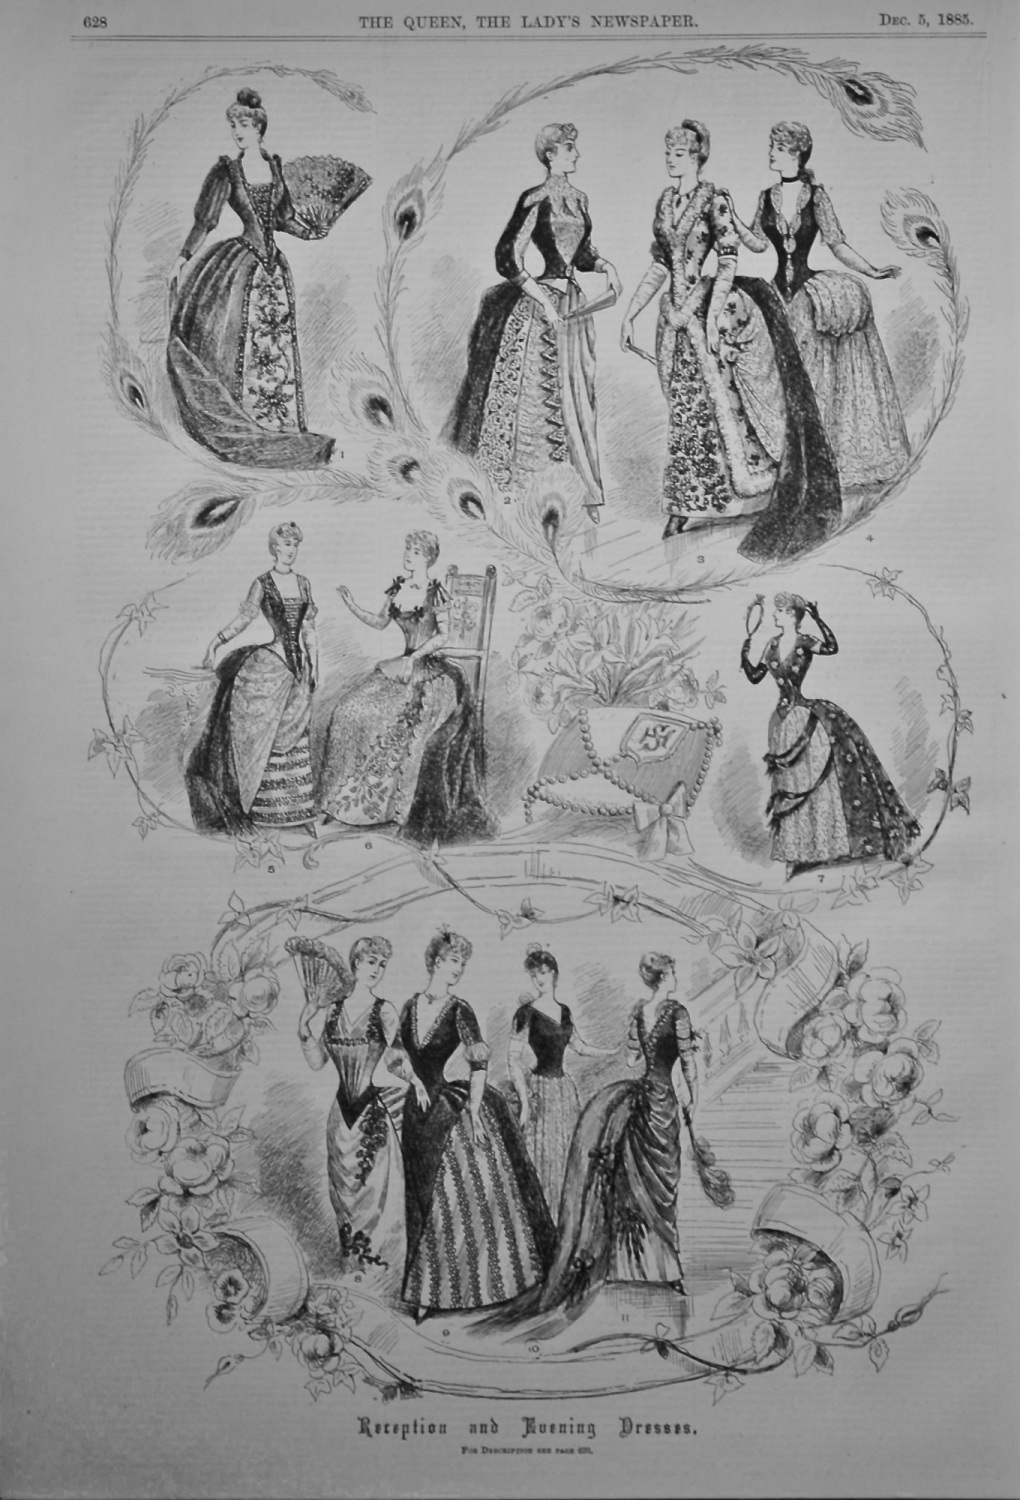 Reception and Evening Dresses. 1885.